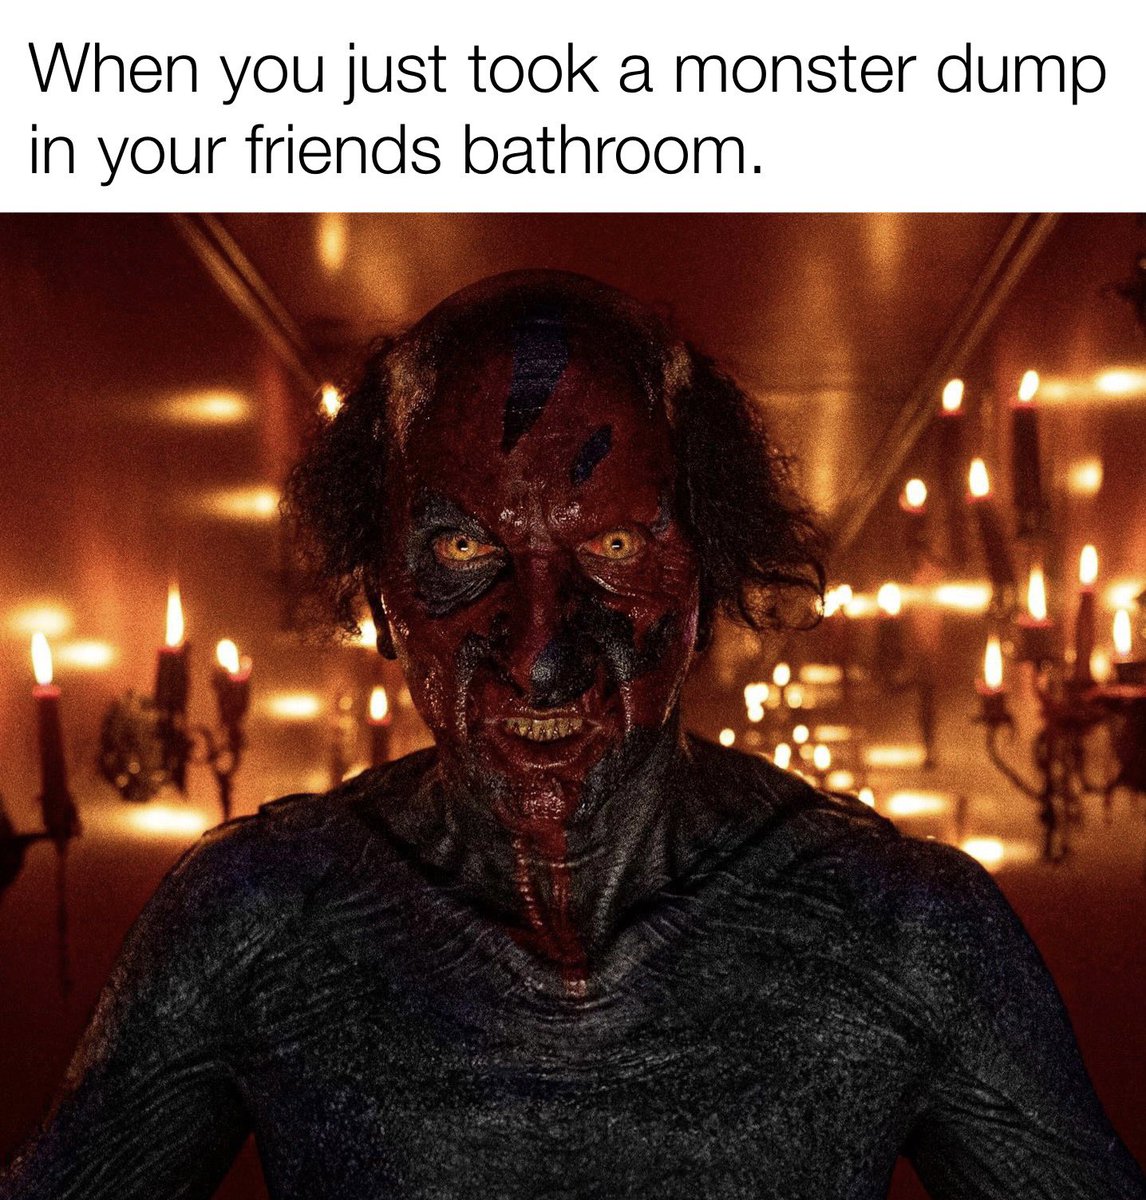 This ever happen to you?

#Horror #HorrorFan #HorrorFans #Insidious #Insidious5 #LeighWhannell #PatrickWilson #RedFacedDemon #HorrorMovies #HorrorMovie #FYP #InsidiousTheRedDoor #KentoftheDead